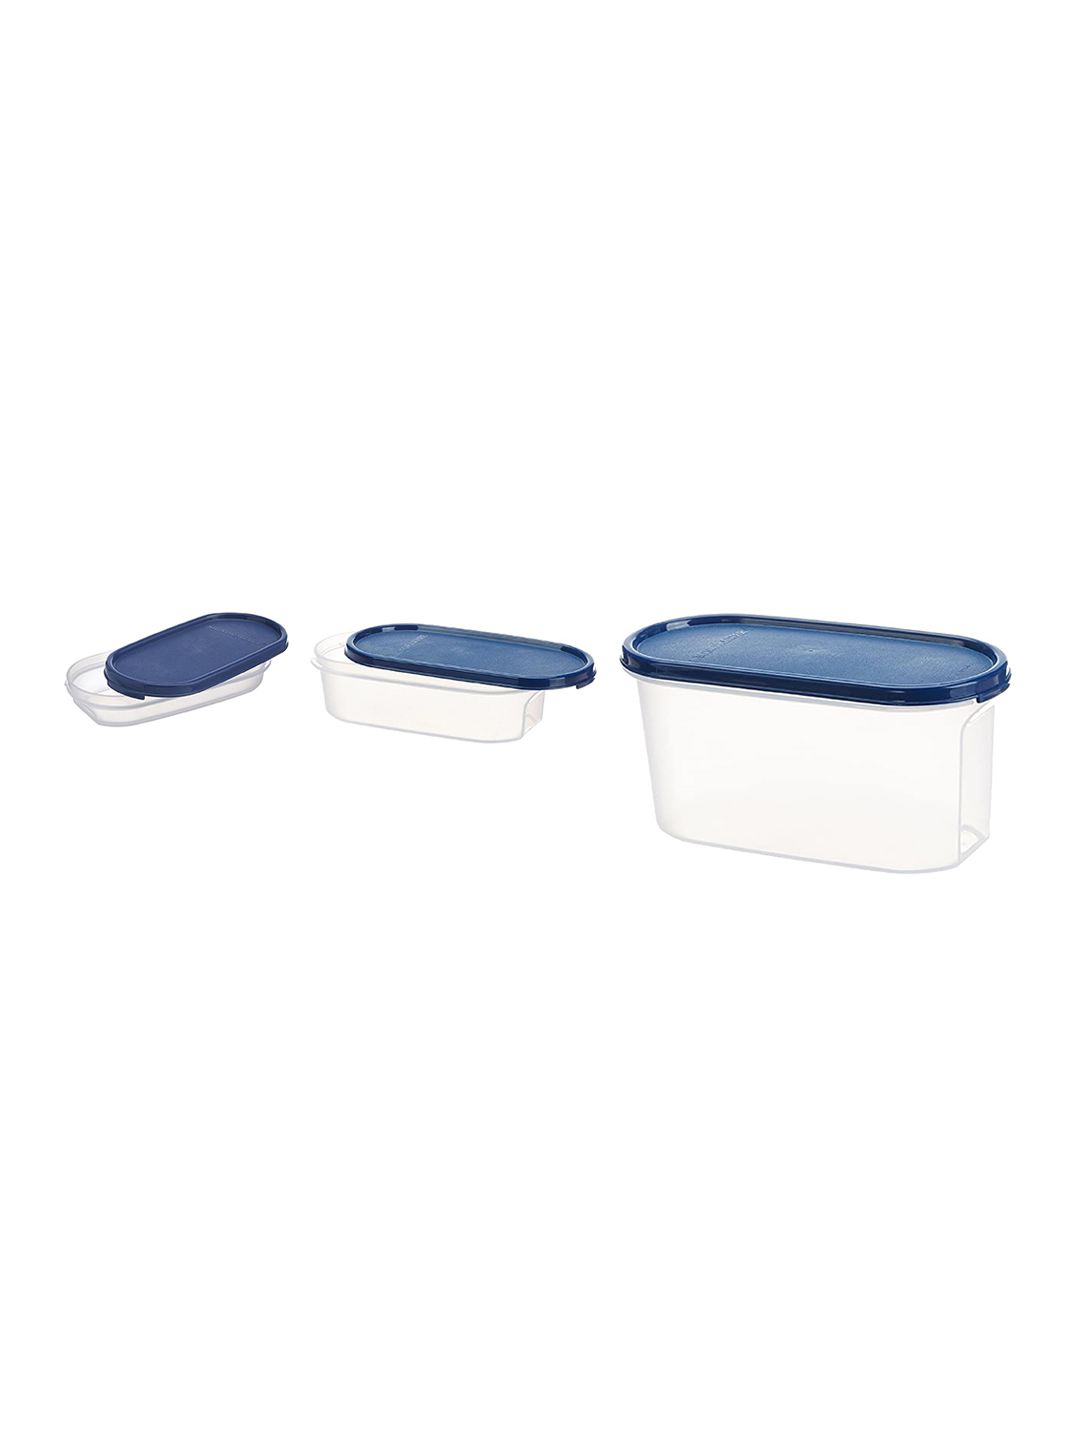 SignoraWare Set Of 3 Solid Food Storage Container Price in India